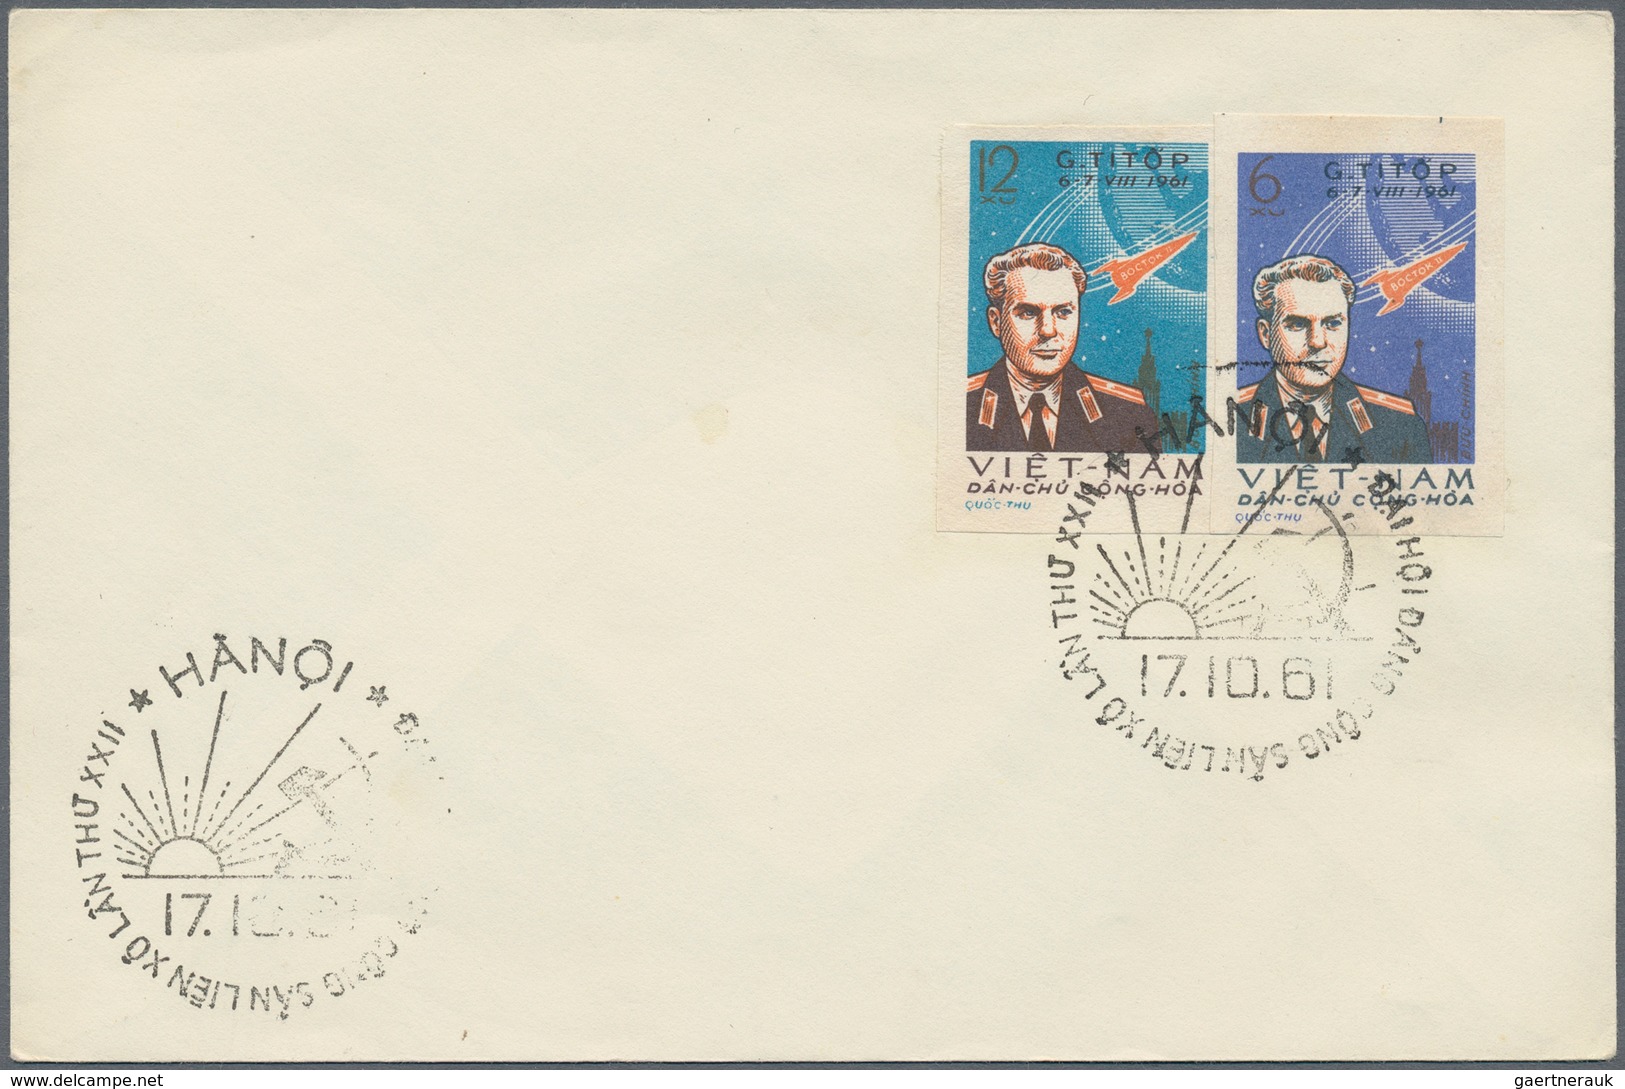 Vietnam-Süd (1951-1975): 1956/1974, accumulation of apprx. 530 commemorative covers, apparently main